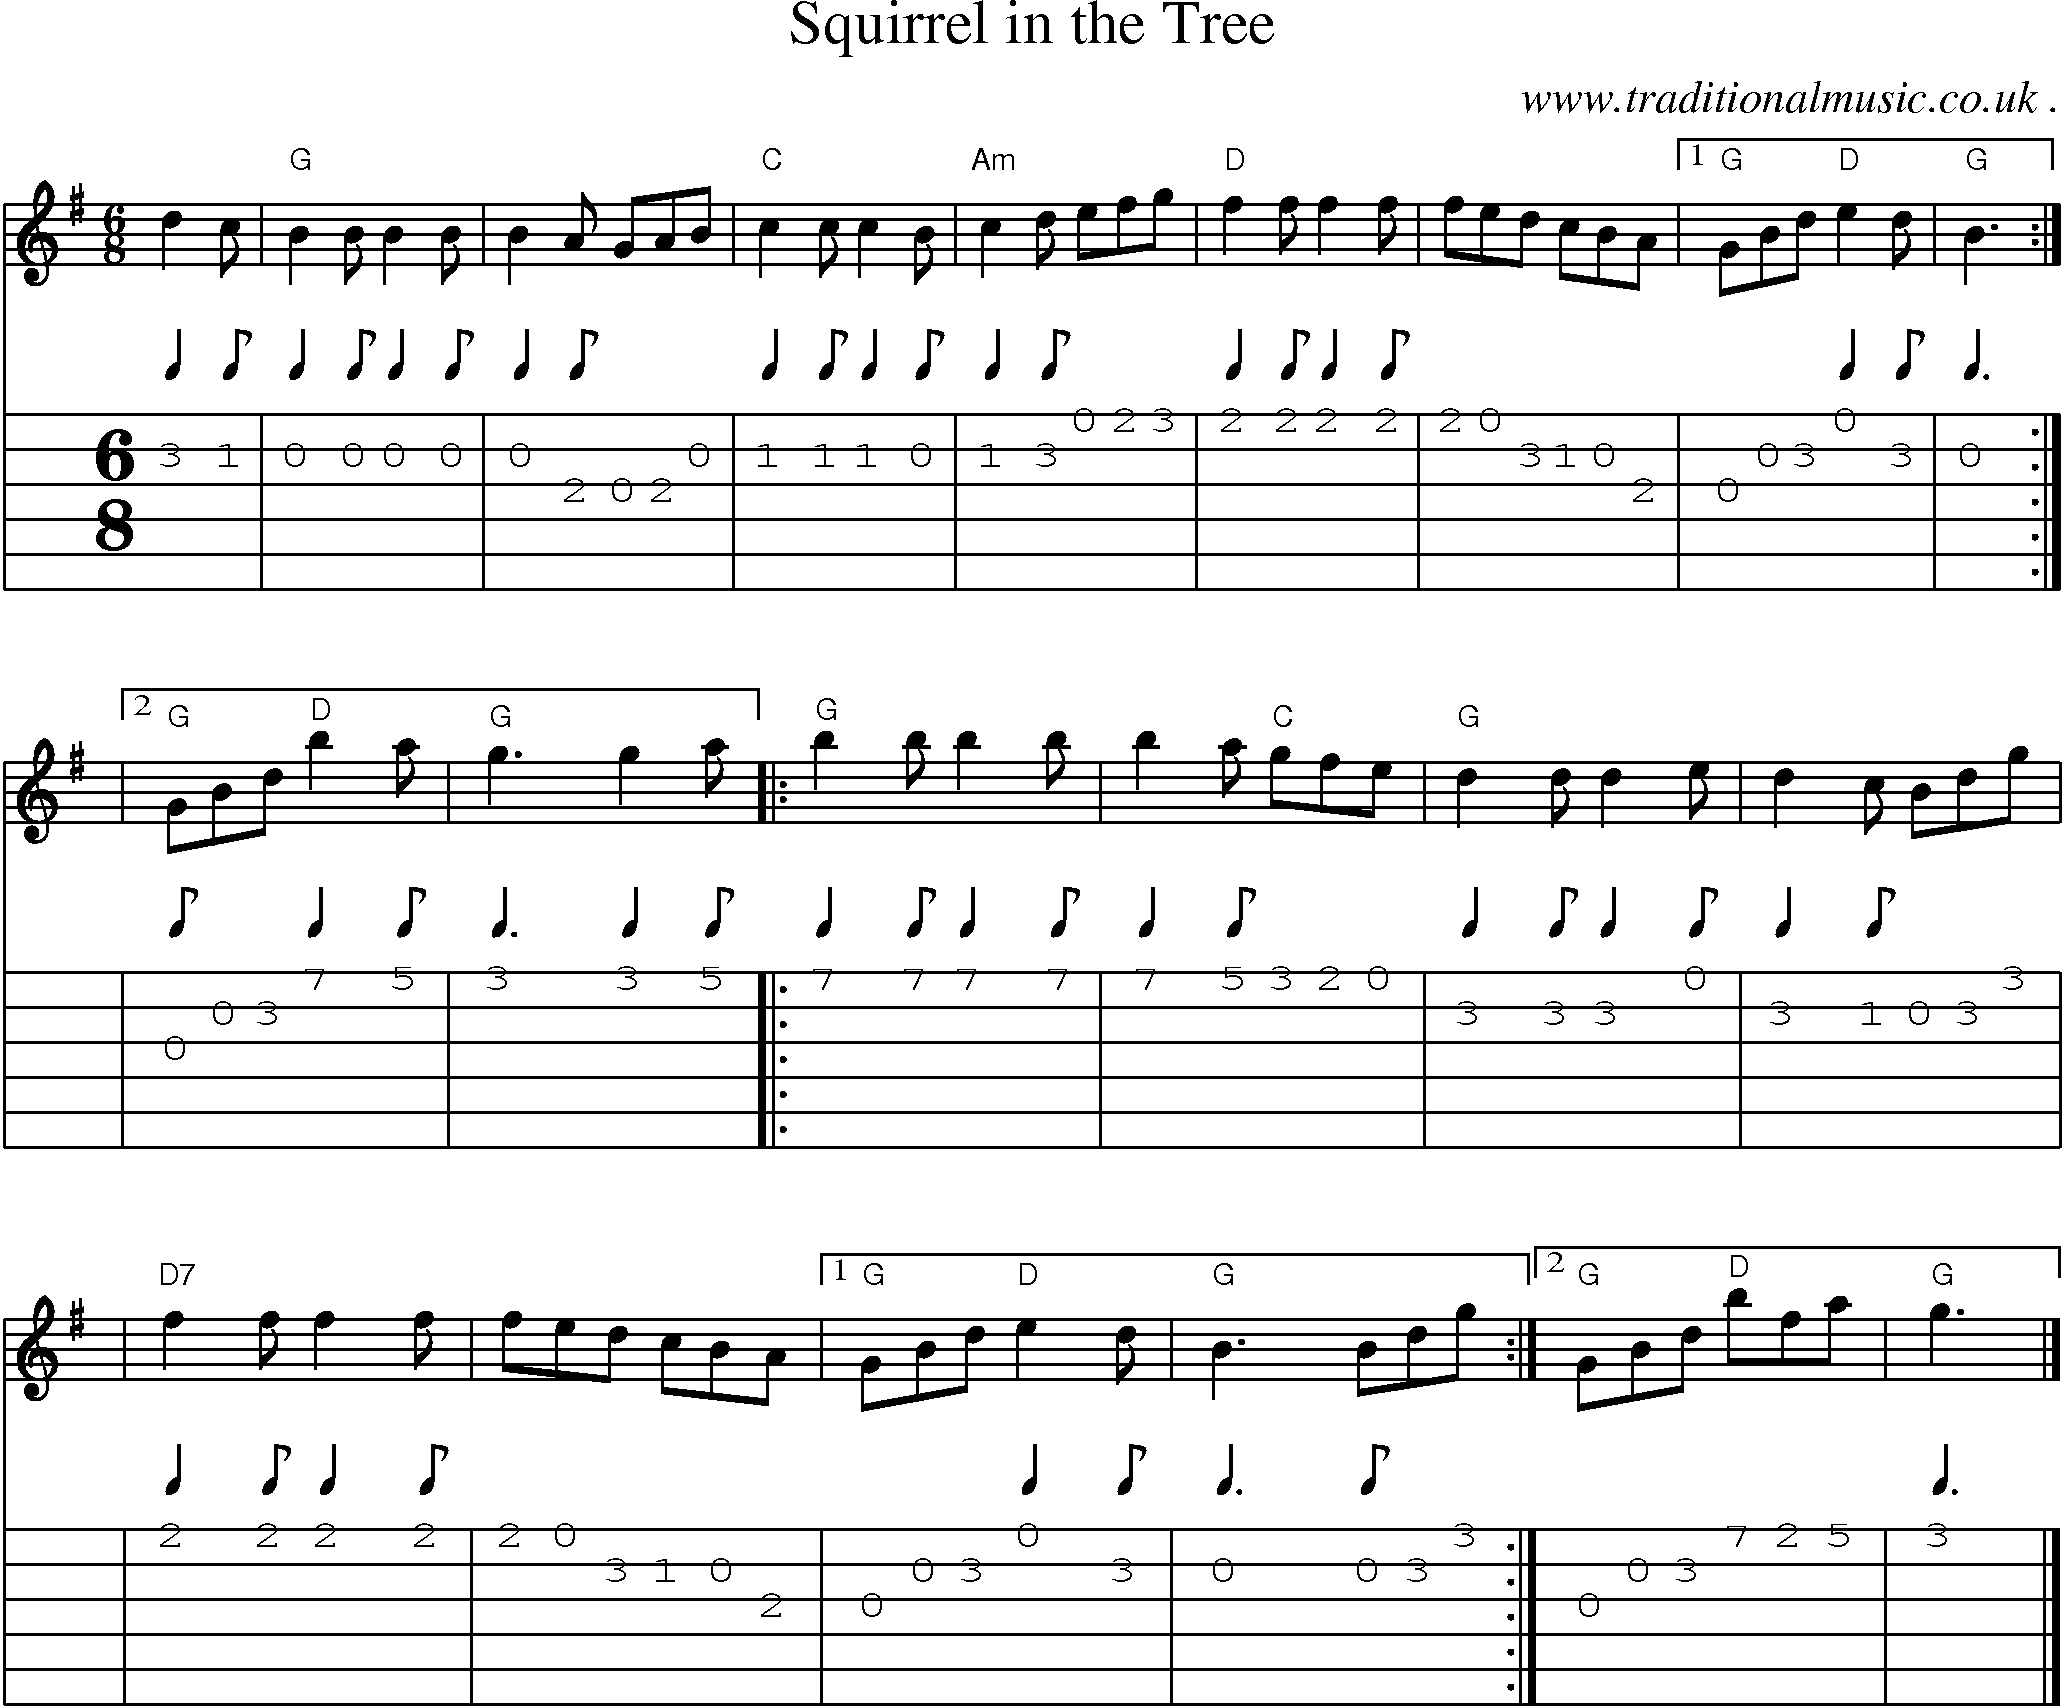 Sheet-music  score, Chords and Guitar Tabs for Squirrel In The Tree